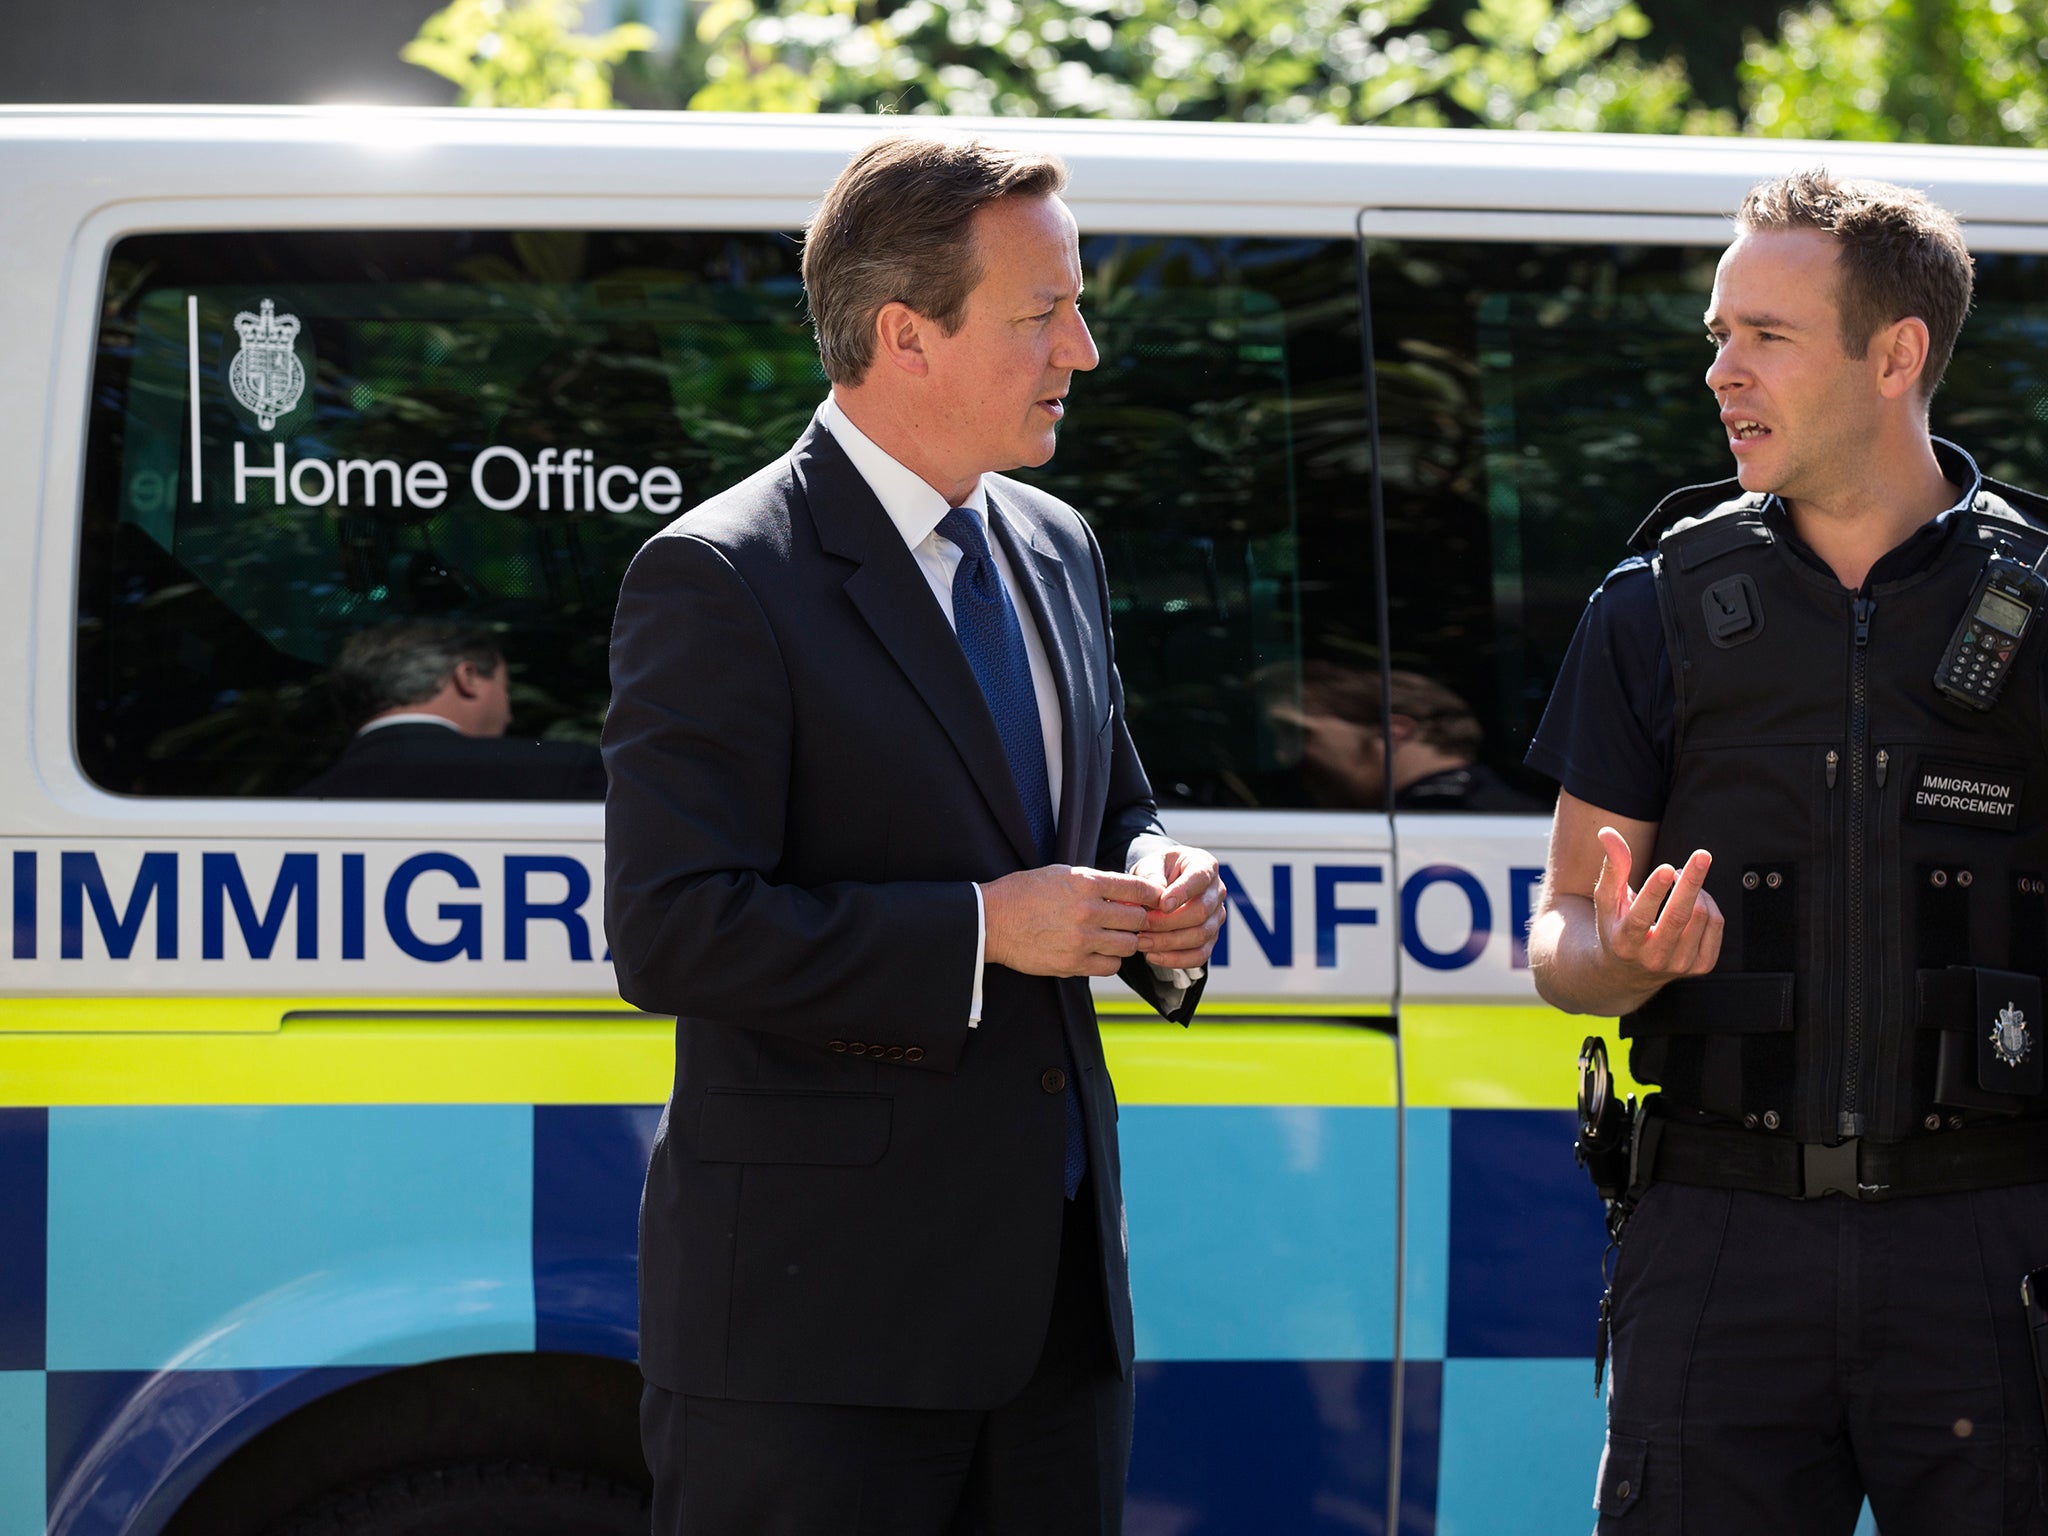 David Cameron is eager to secure a ban on in-work benefits for EU migrants